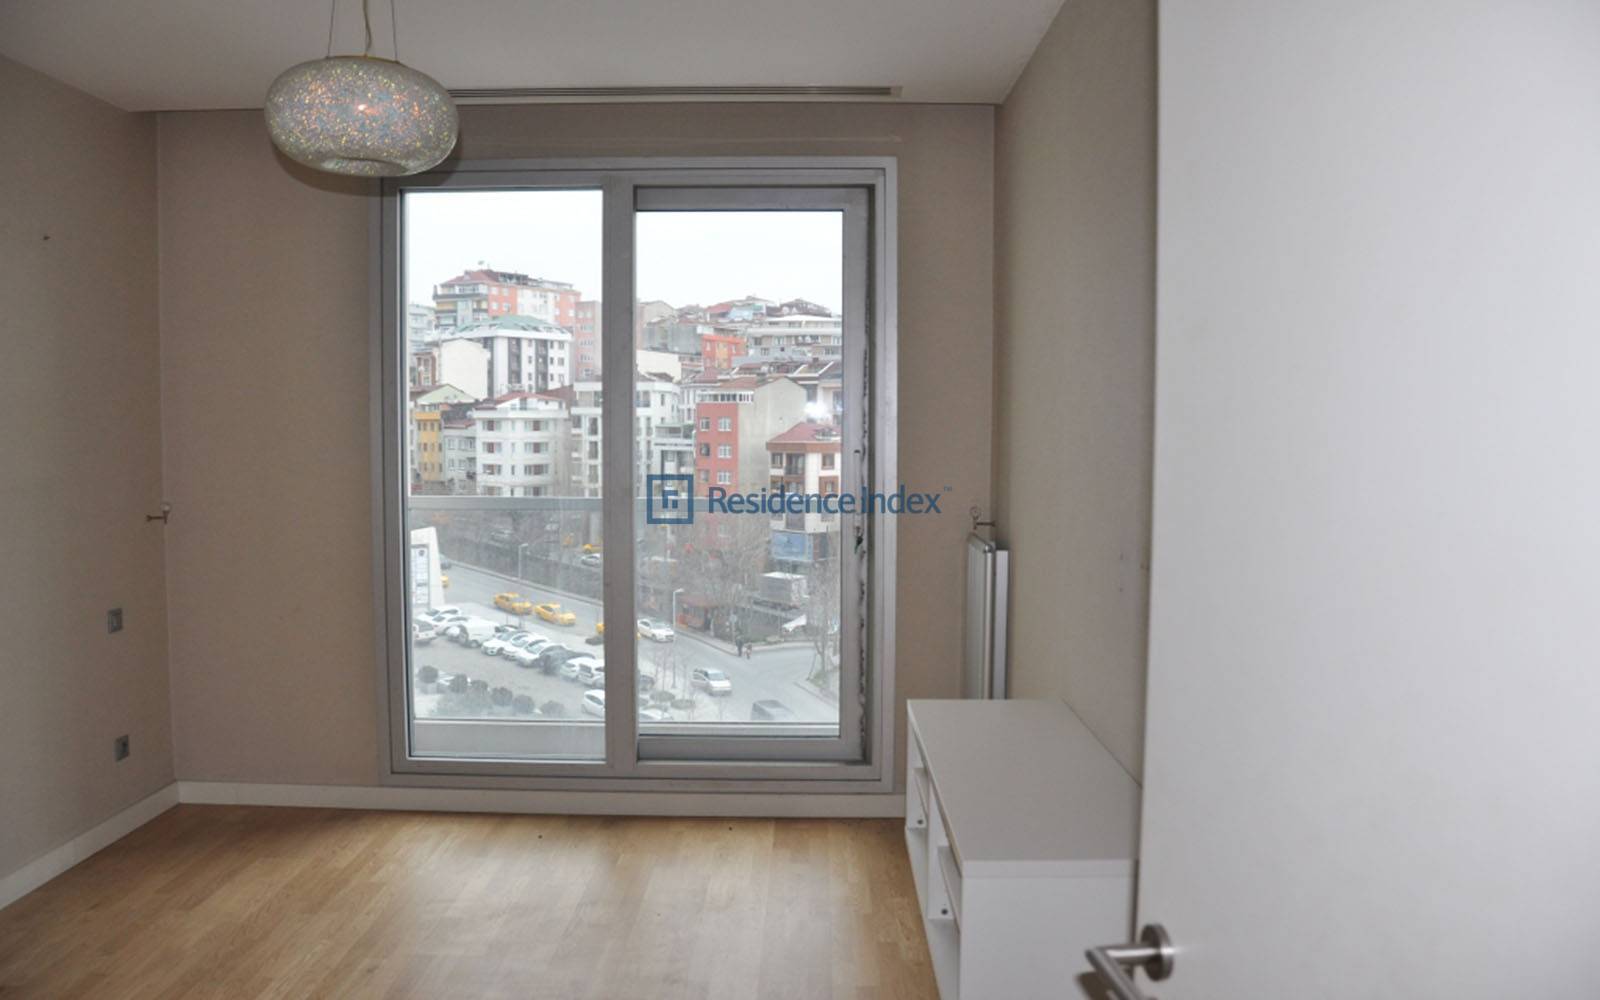 1 + 1 Apartment for Sale in a great location